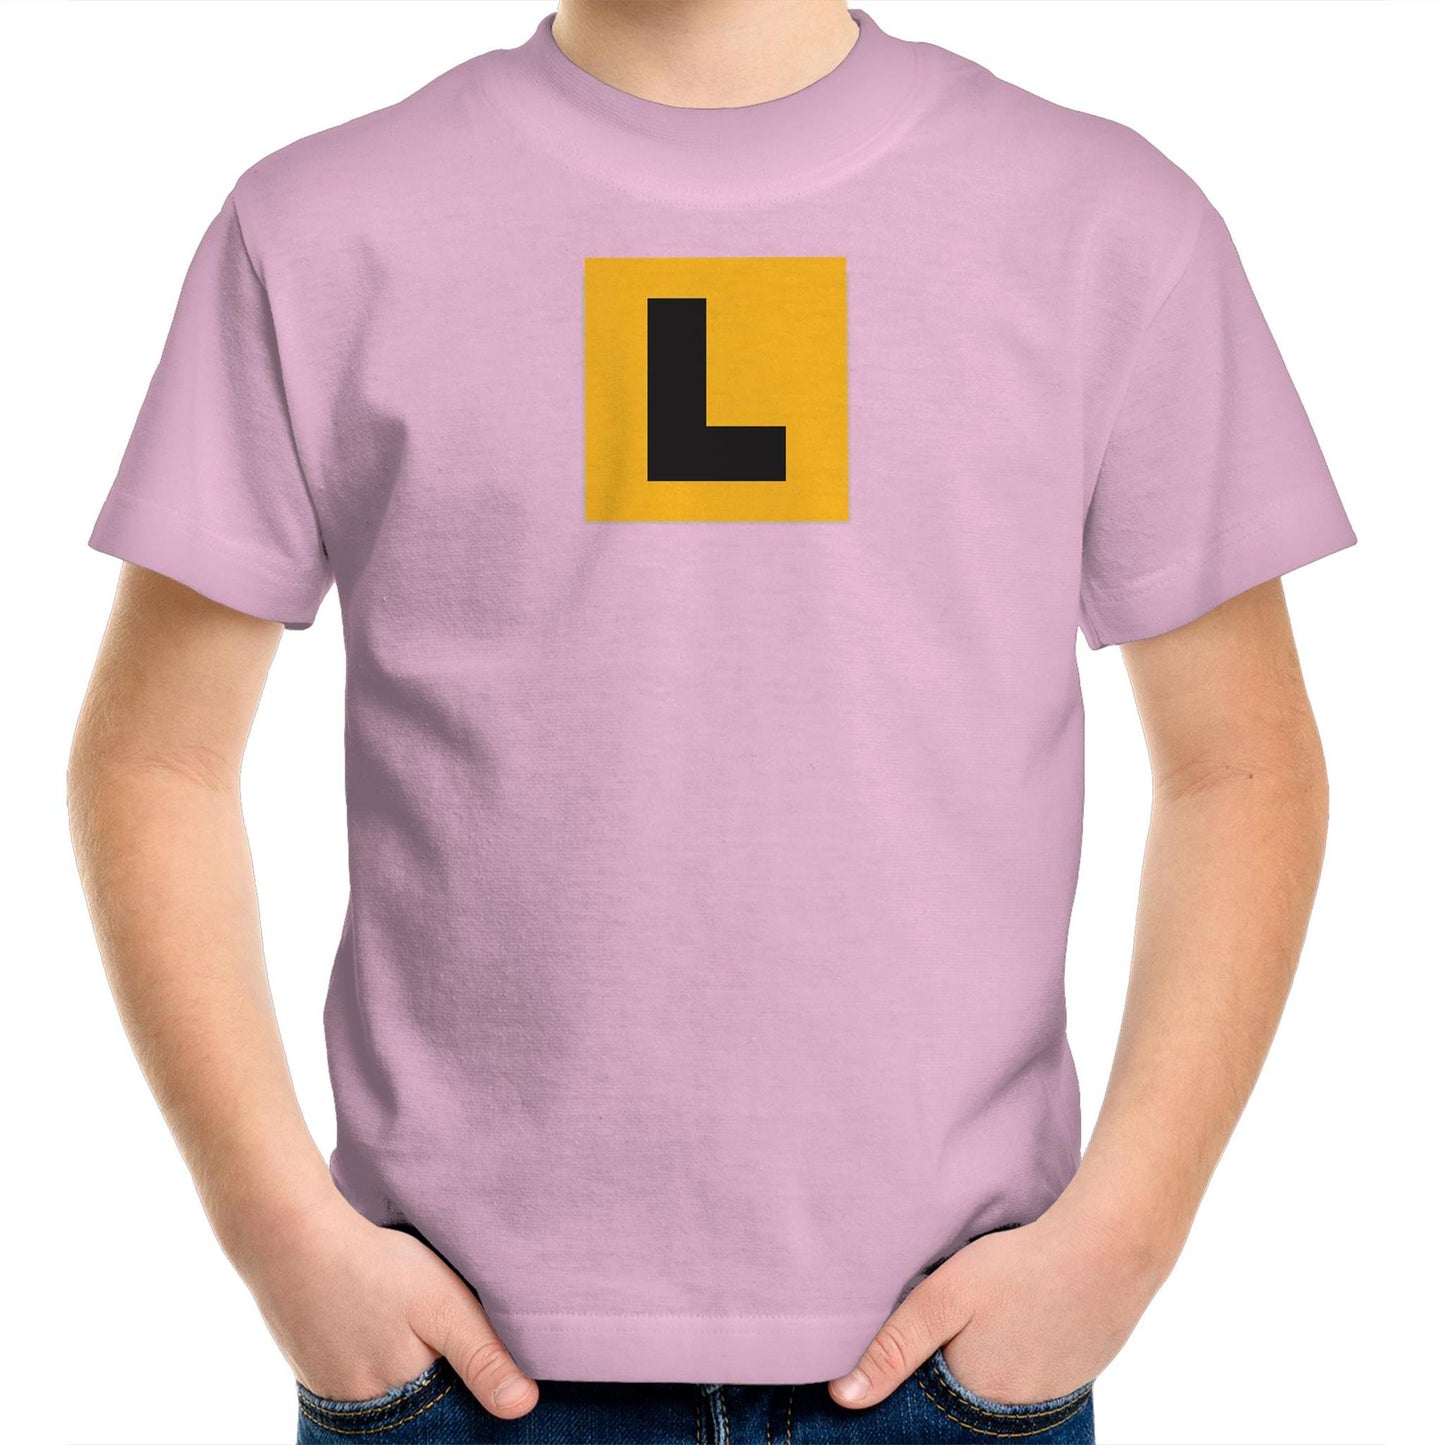 L Plate T Shirts for Kids